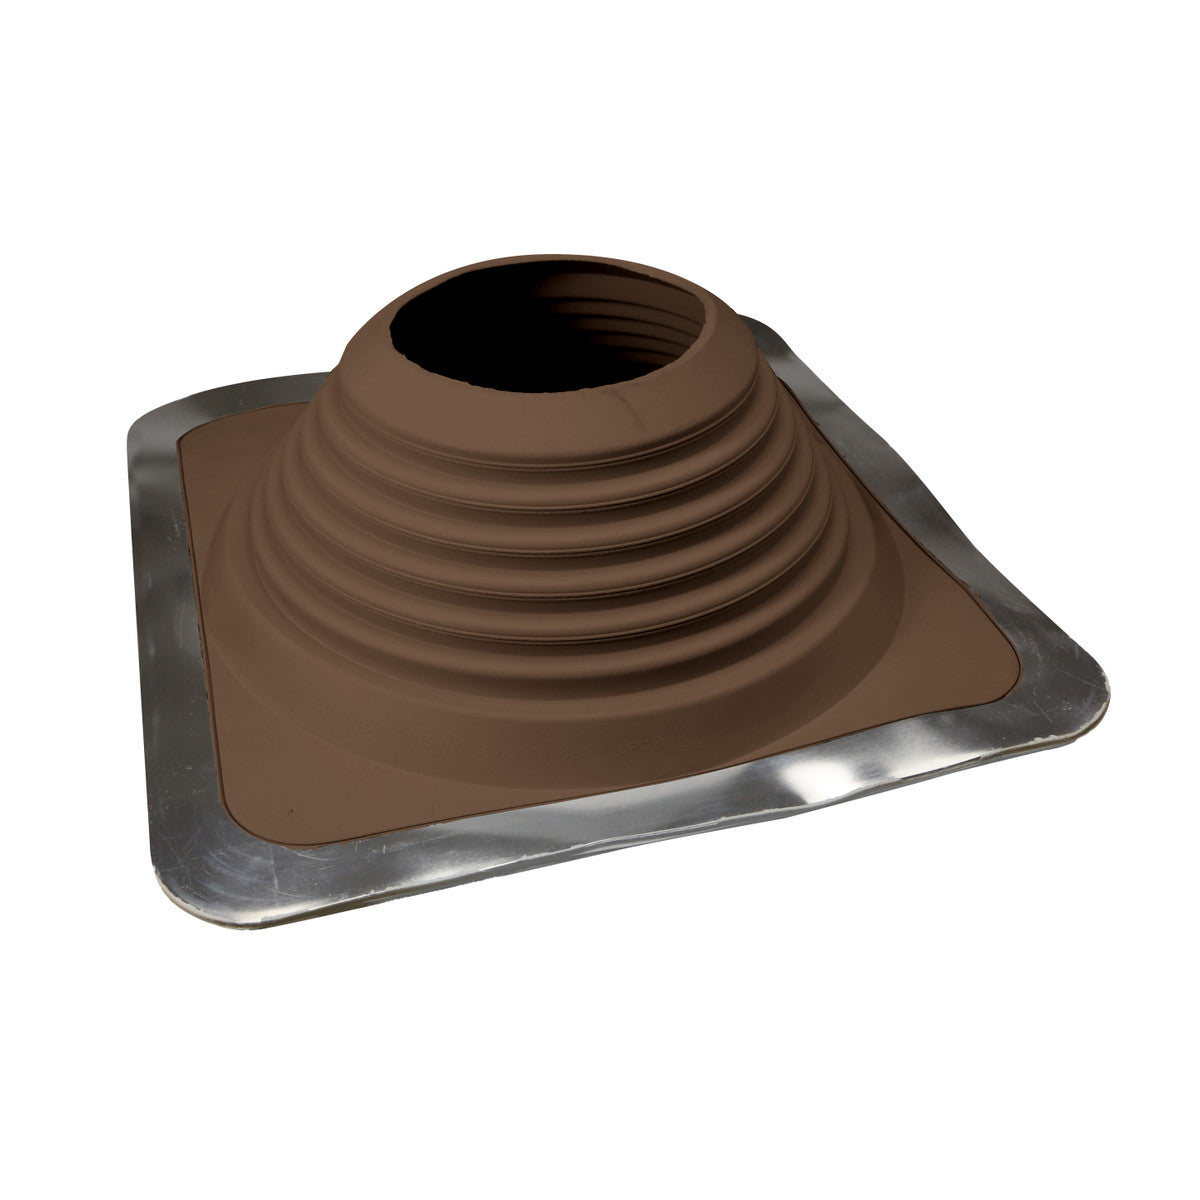 #8 Roofjack Square EPDM Pipe Flashing Boot, Brown